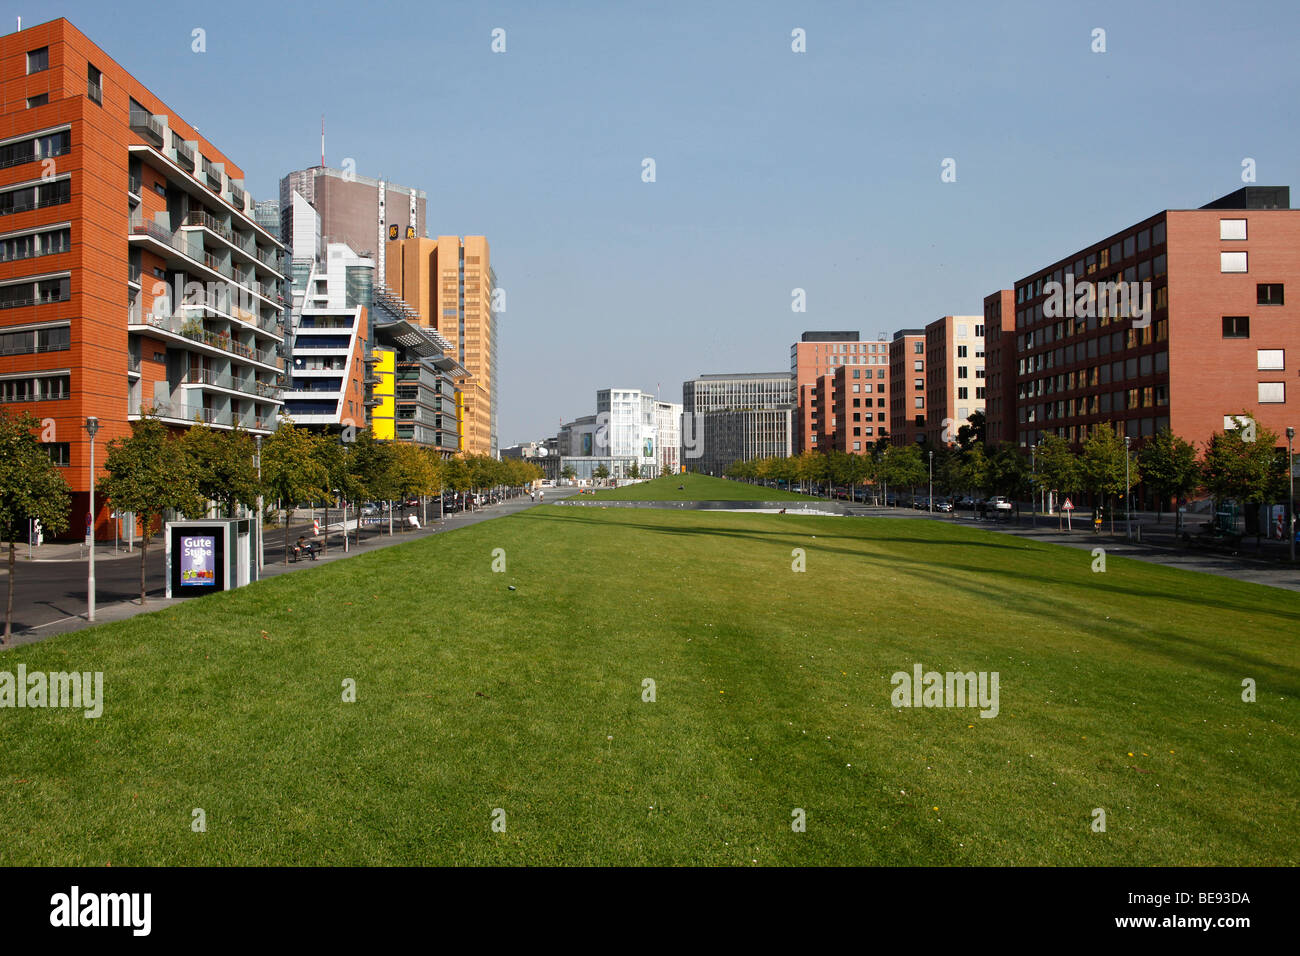 The Linkstrasse road at Potsdamer Platz square with buildings of DaimlerChrysler, Berlin, Germany, Europe Stock Photo